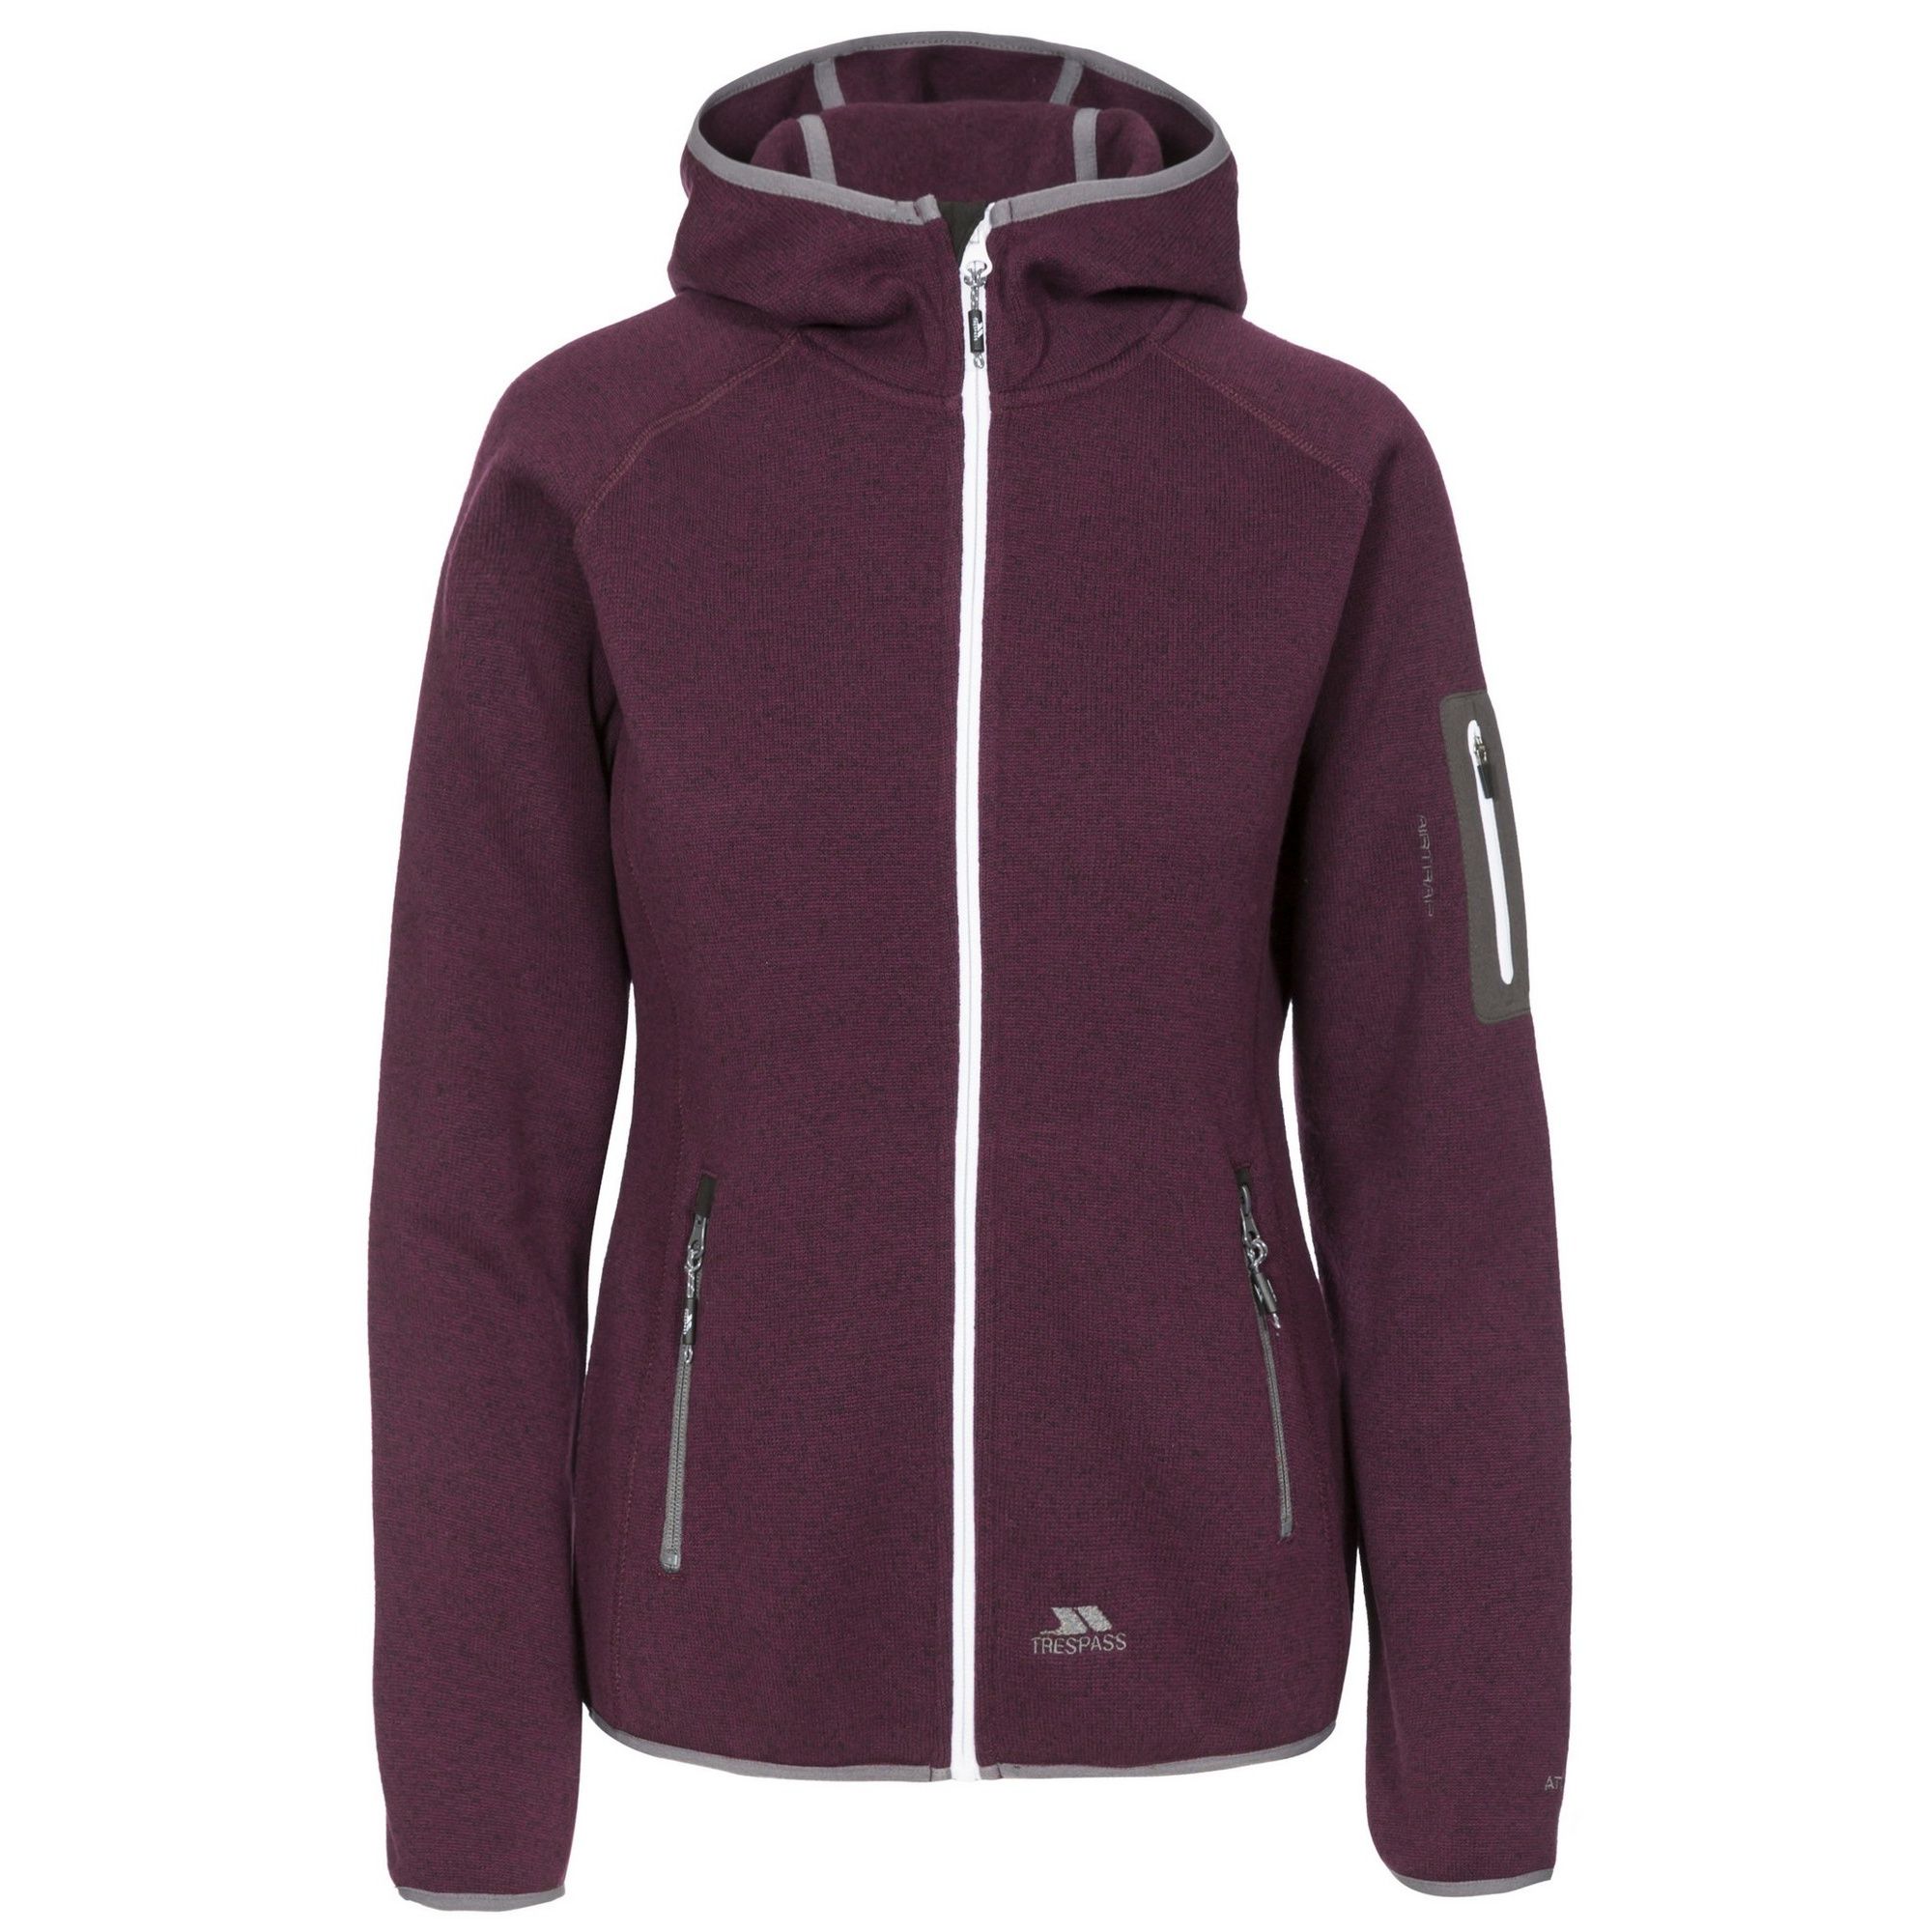 Womens hooded fleece made from AirTrap material. Grown on hood. Contrast low profile zips. Stretch guard. 2 x contrast zip pockets. 1 x sleeve zip pocket with stretch fabric. Contrast stretch binding. Ideal for wearing outside on a cold day. 100% Polyester.